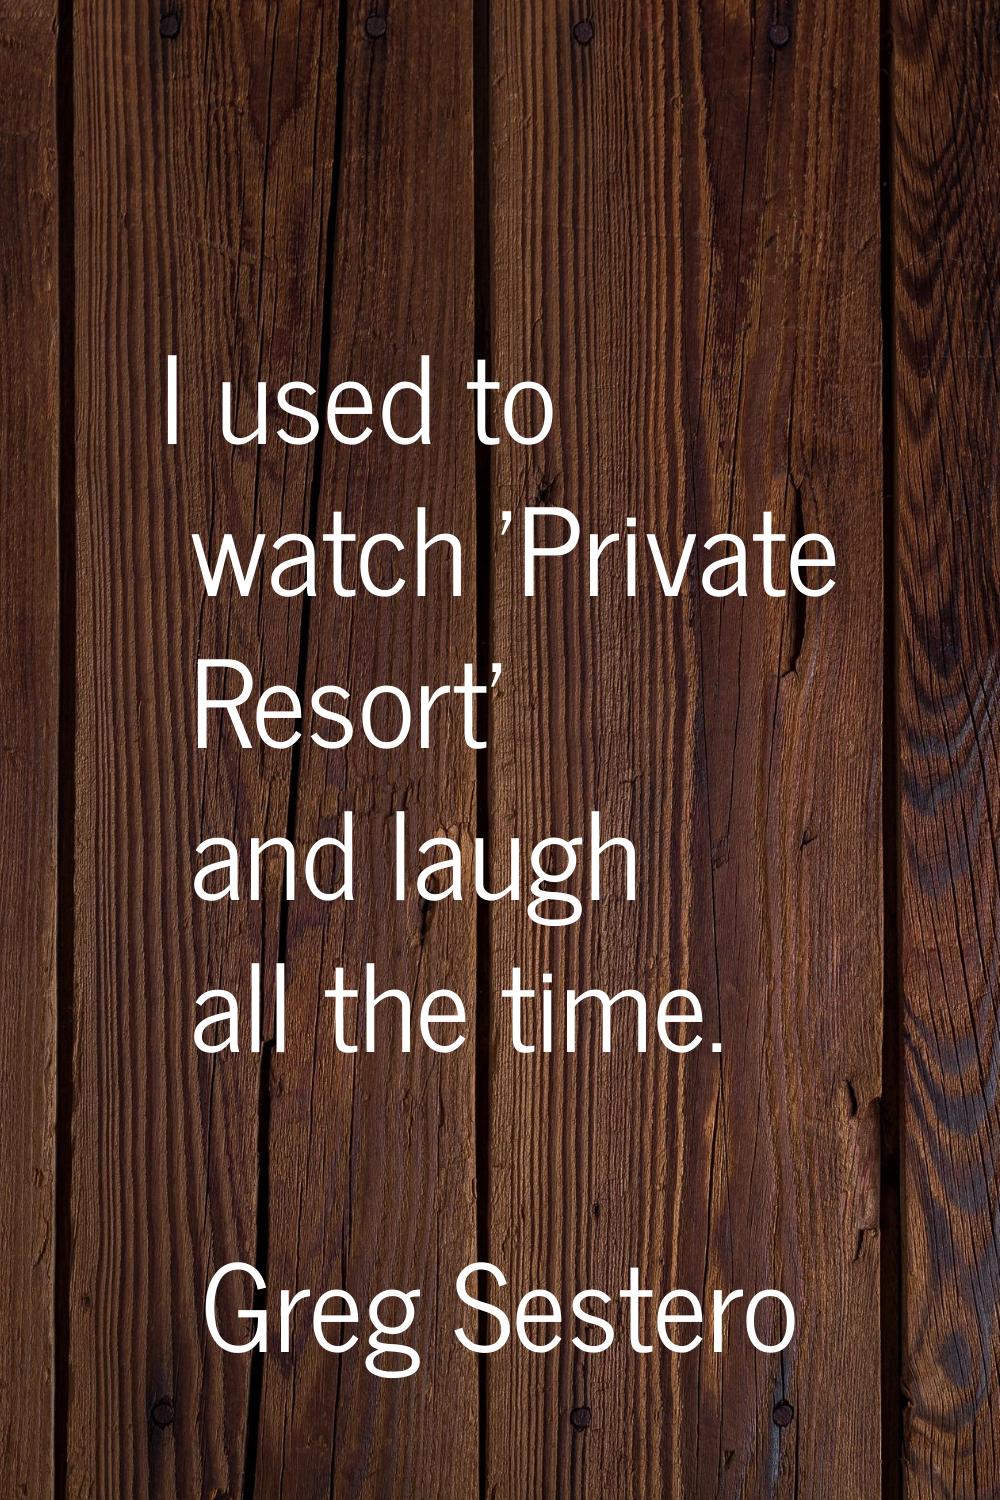 I used to watch 'Private Resort' and laugh all the time.